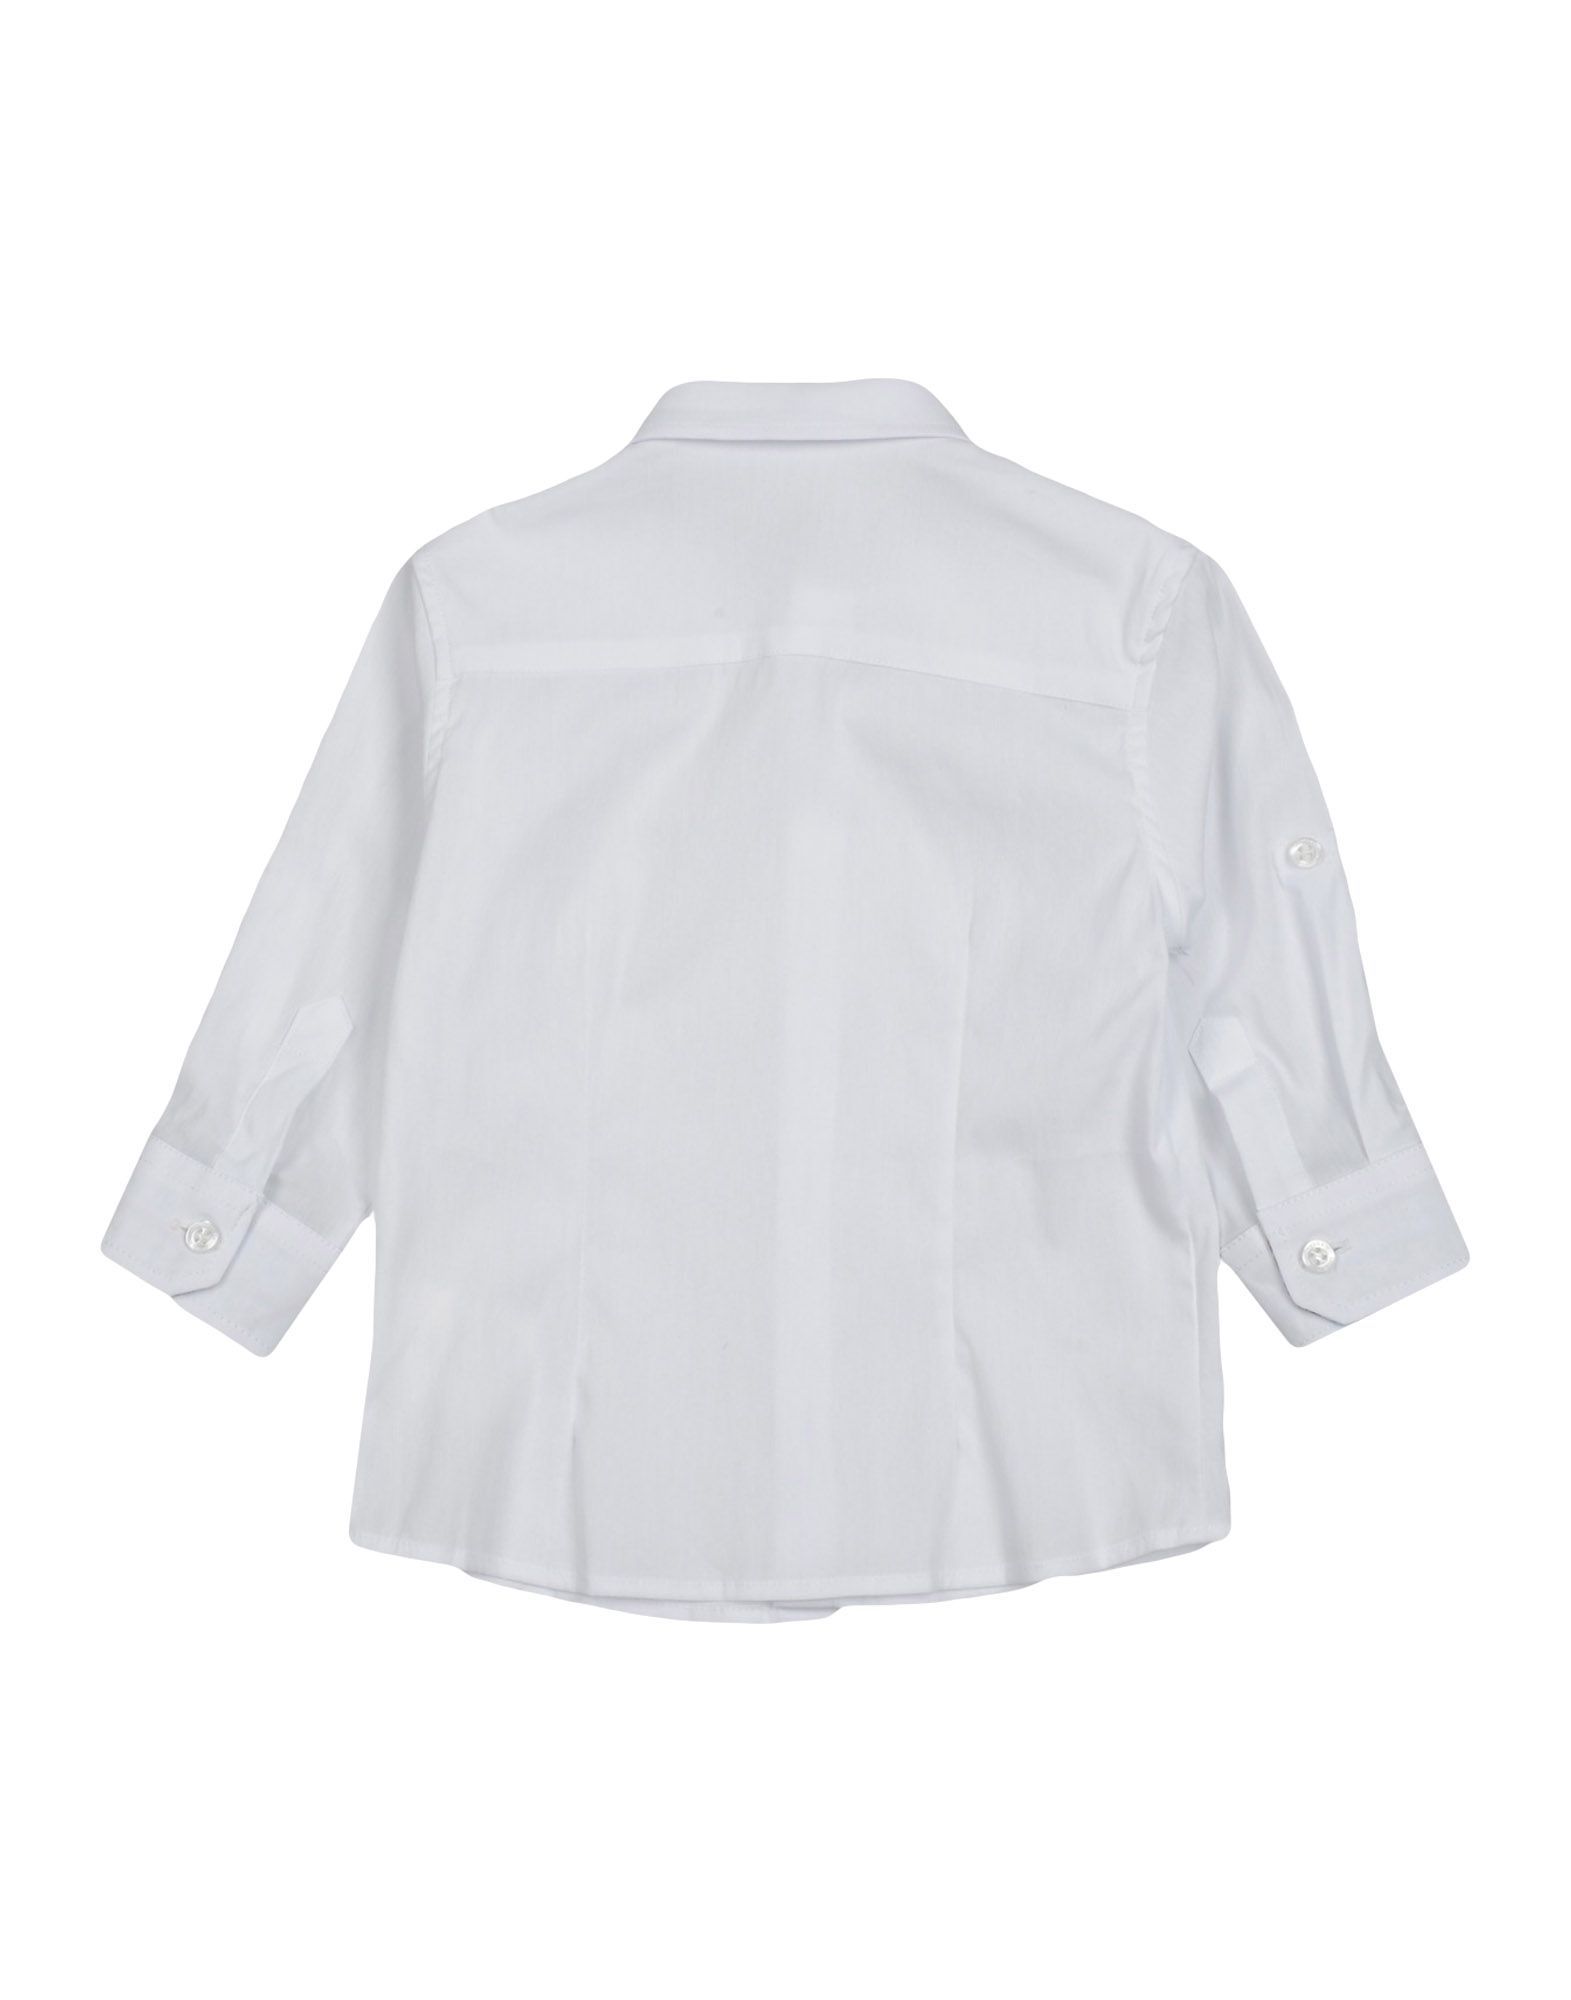 plain weave, no appliqués, basic solid colour, front closure, button closing, 3/4 length sleeves, classic neckline, no pockets, stretch, wash at 40° c, dry cleanable, iron at 150° c max, do not bleach, do not tumble dry, small sized